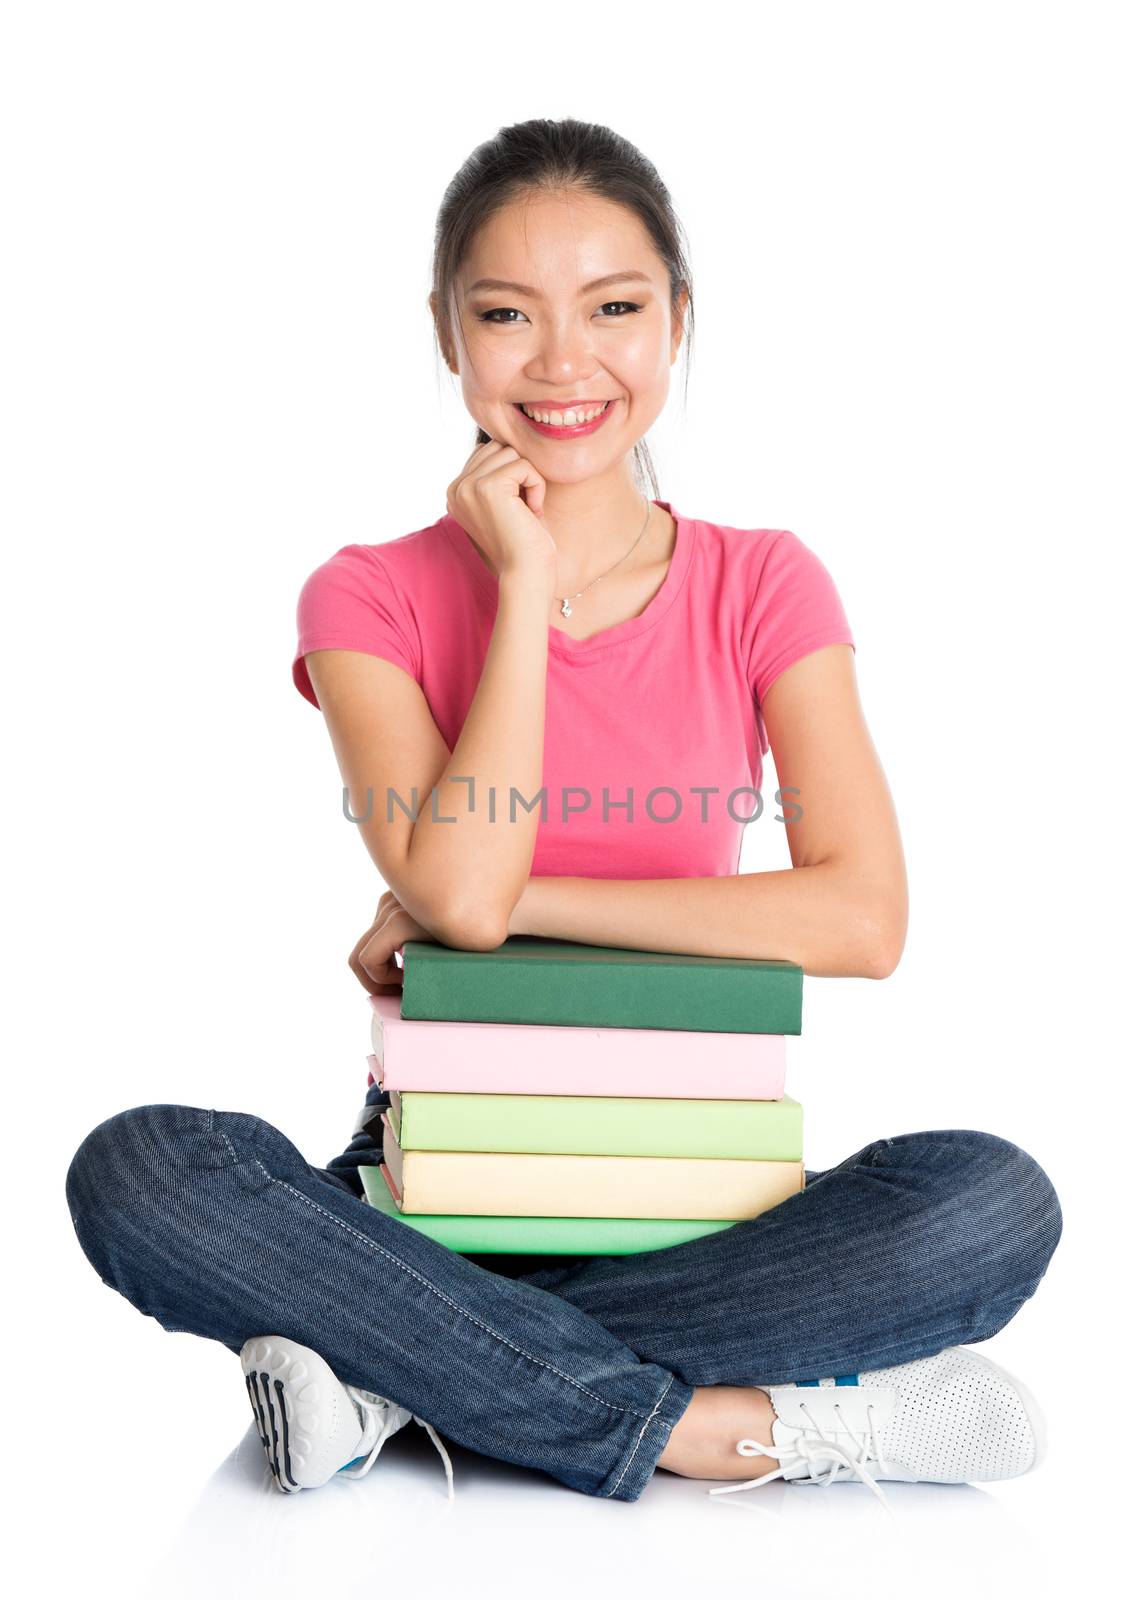 Full body young Asian college girl student in pink shirt with stack of textbooks, seated on floor, full length isolated on white background.